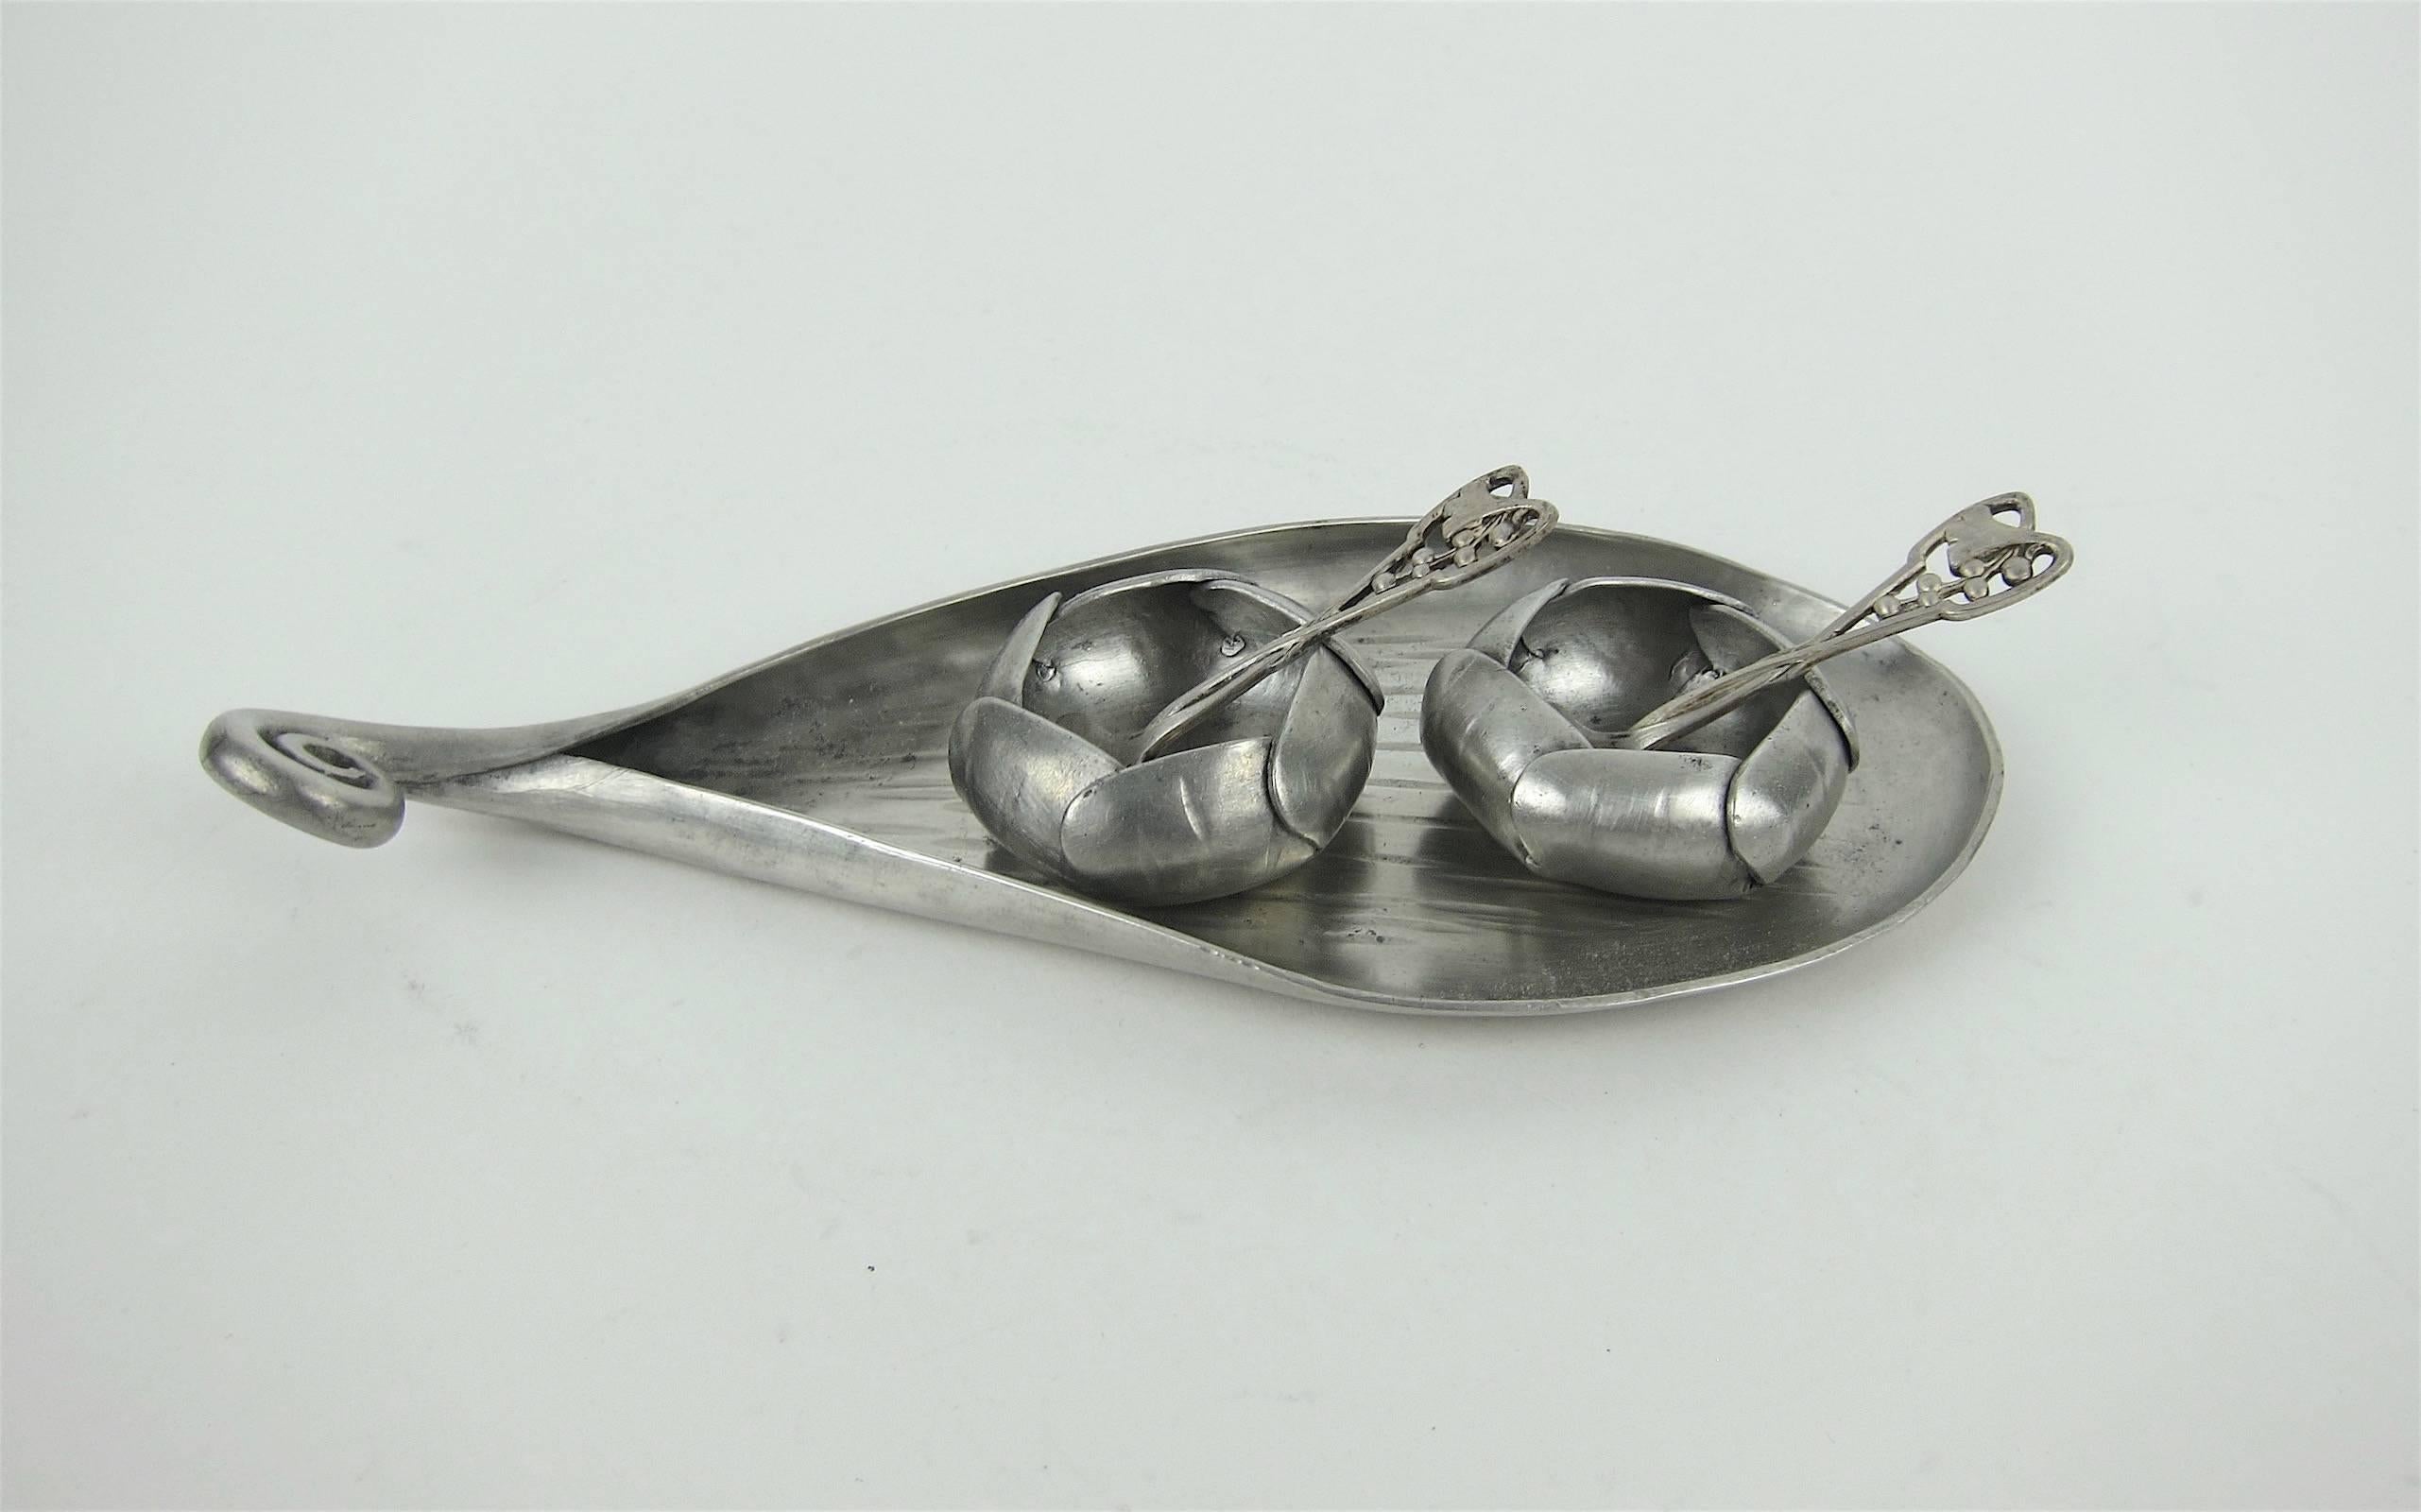 Hammered A E Chanal French Art Nouveau Open Salt Set in Hand-Wrought Pewter